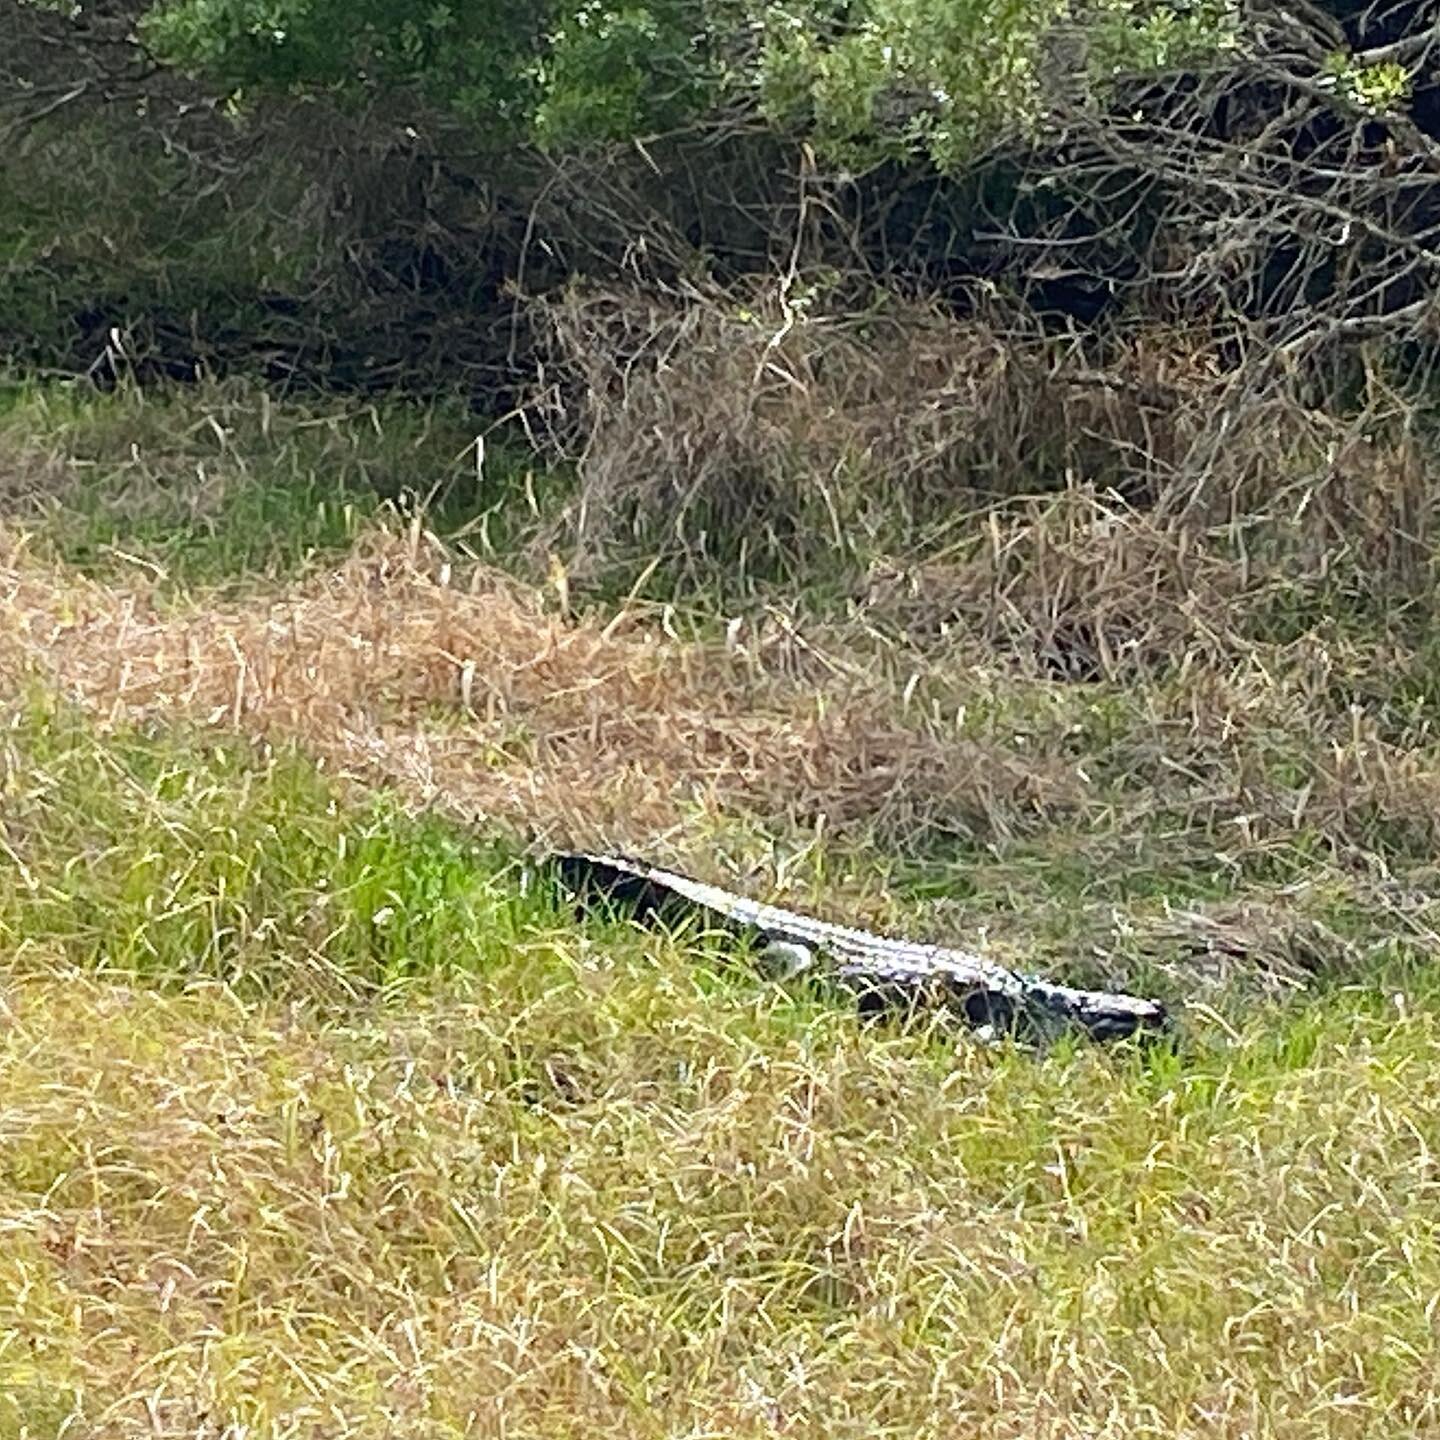 Alligator sunning itself! They need to keep their temperature about 86 degrees in order to digest whatever they eat. All of you up north are safe from being alligator brunch- it&rsquo;s too cold for them. 😊#alligator #sarasota